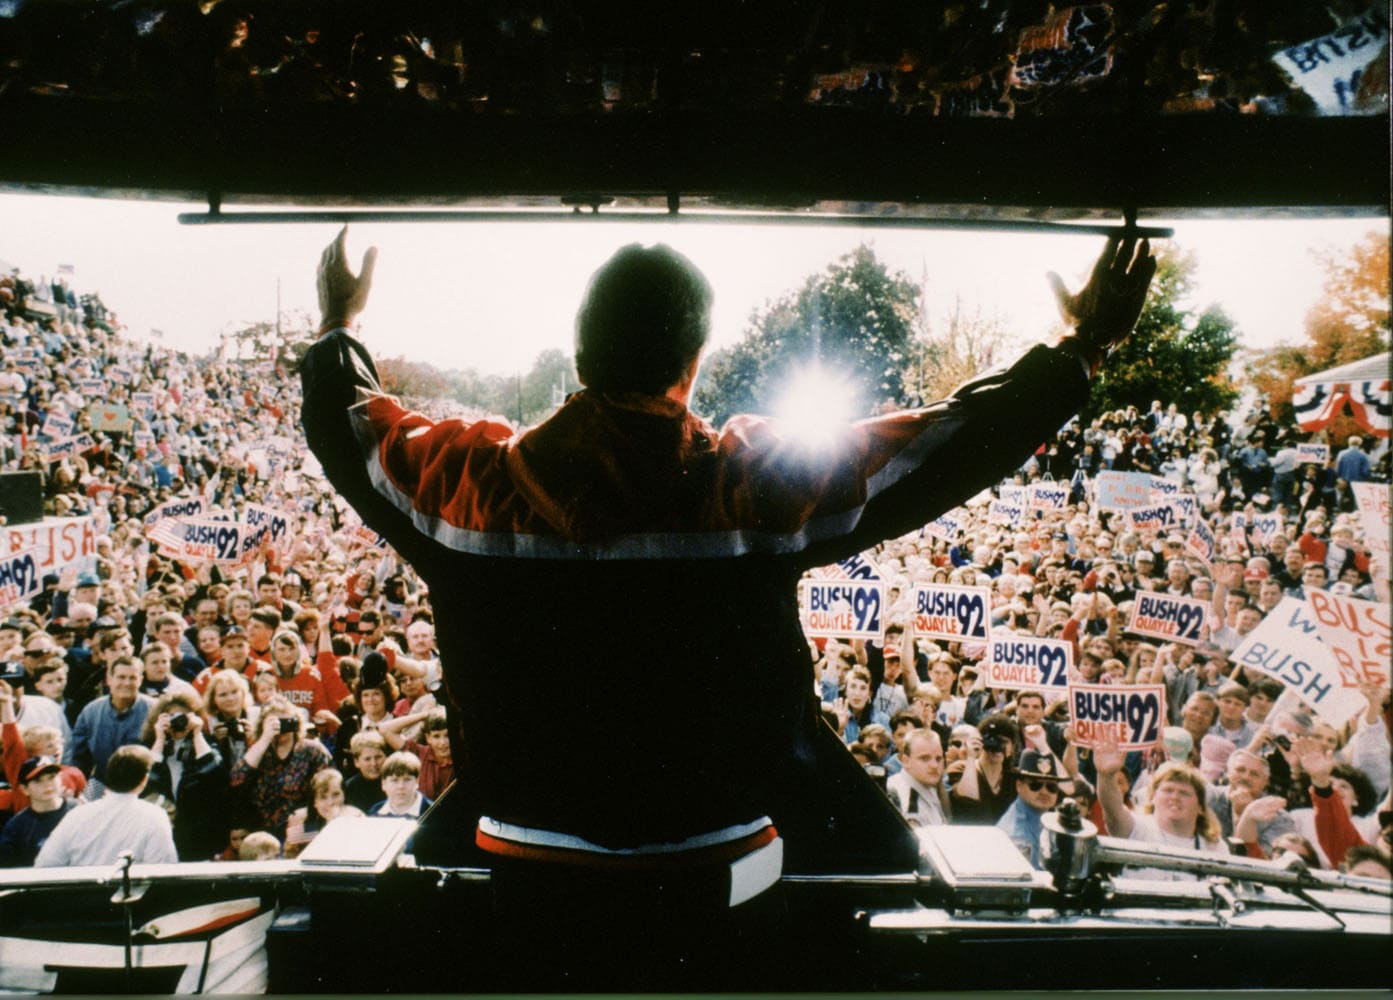 President George H.W. Bush addresses his supporters during his campaign whistle stop tour on October 20, 1992 in Norcross, Georgia.